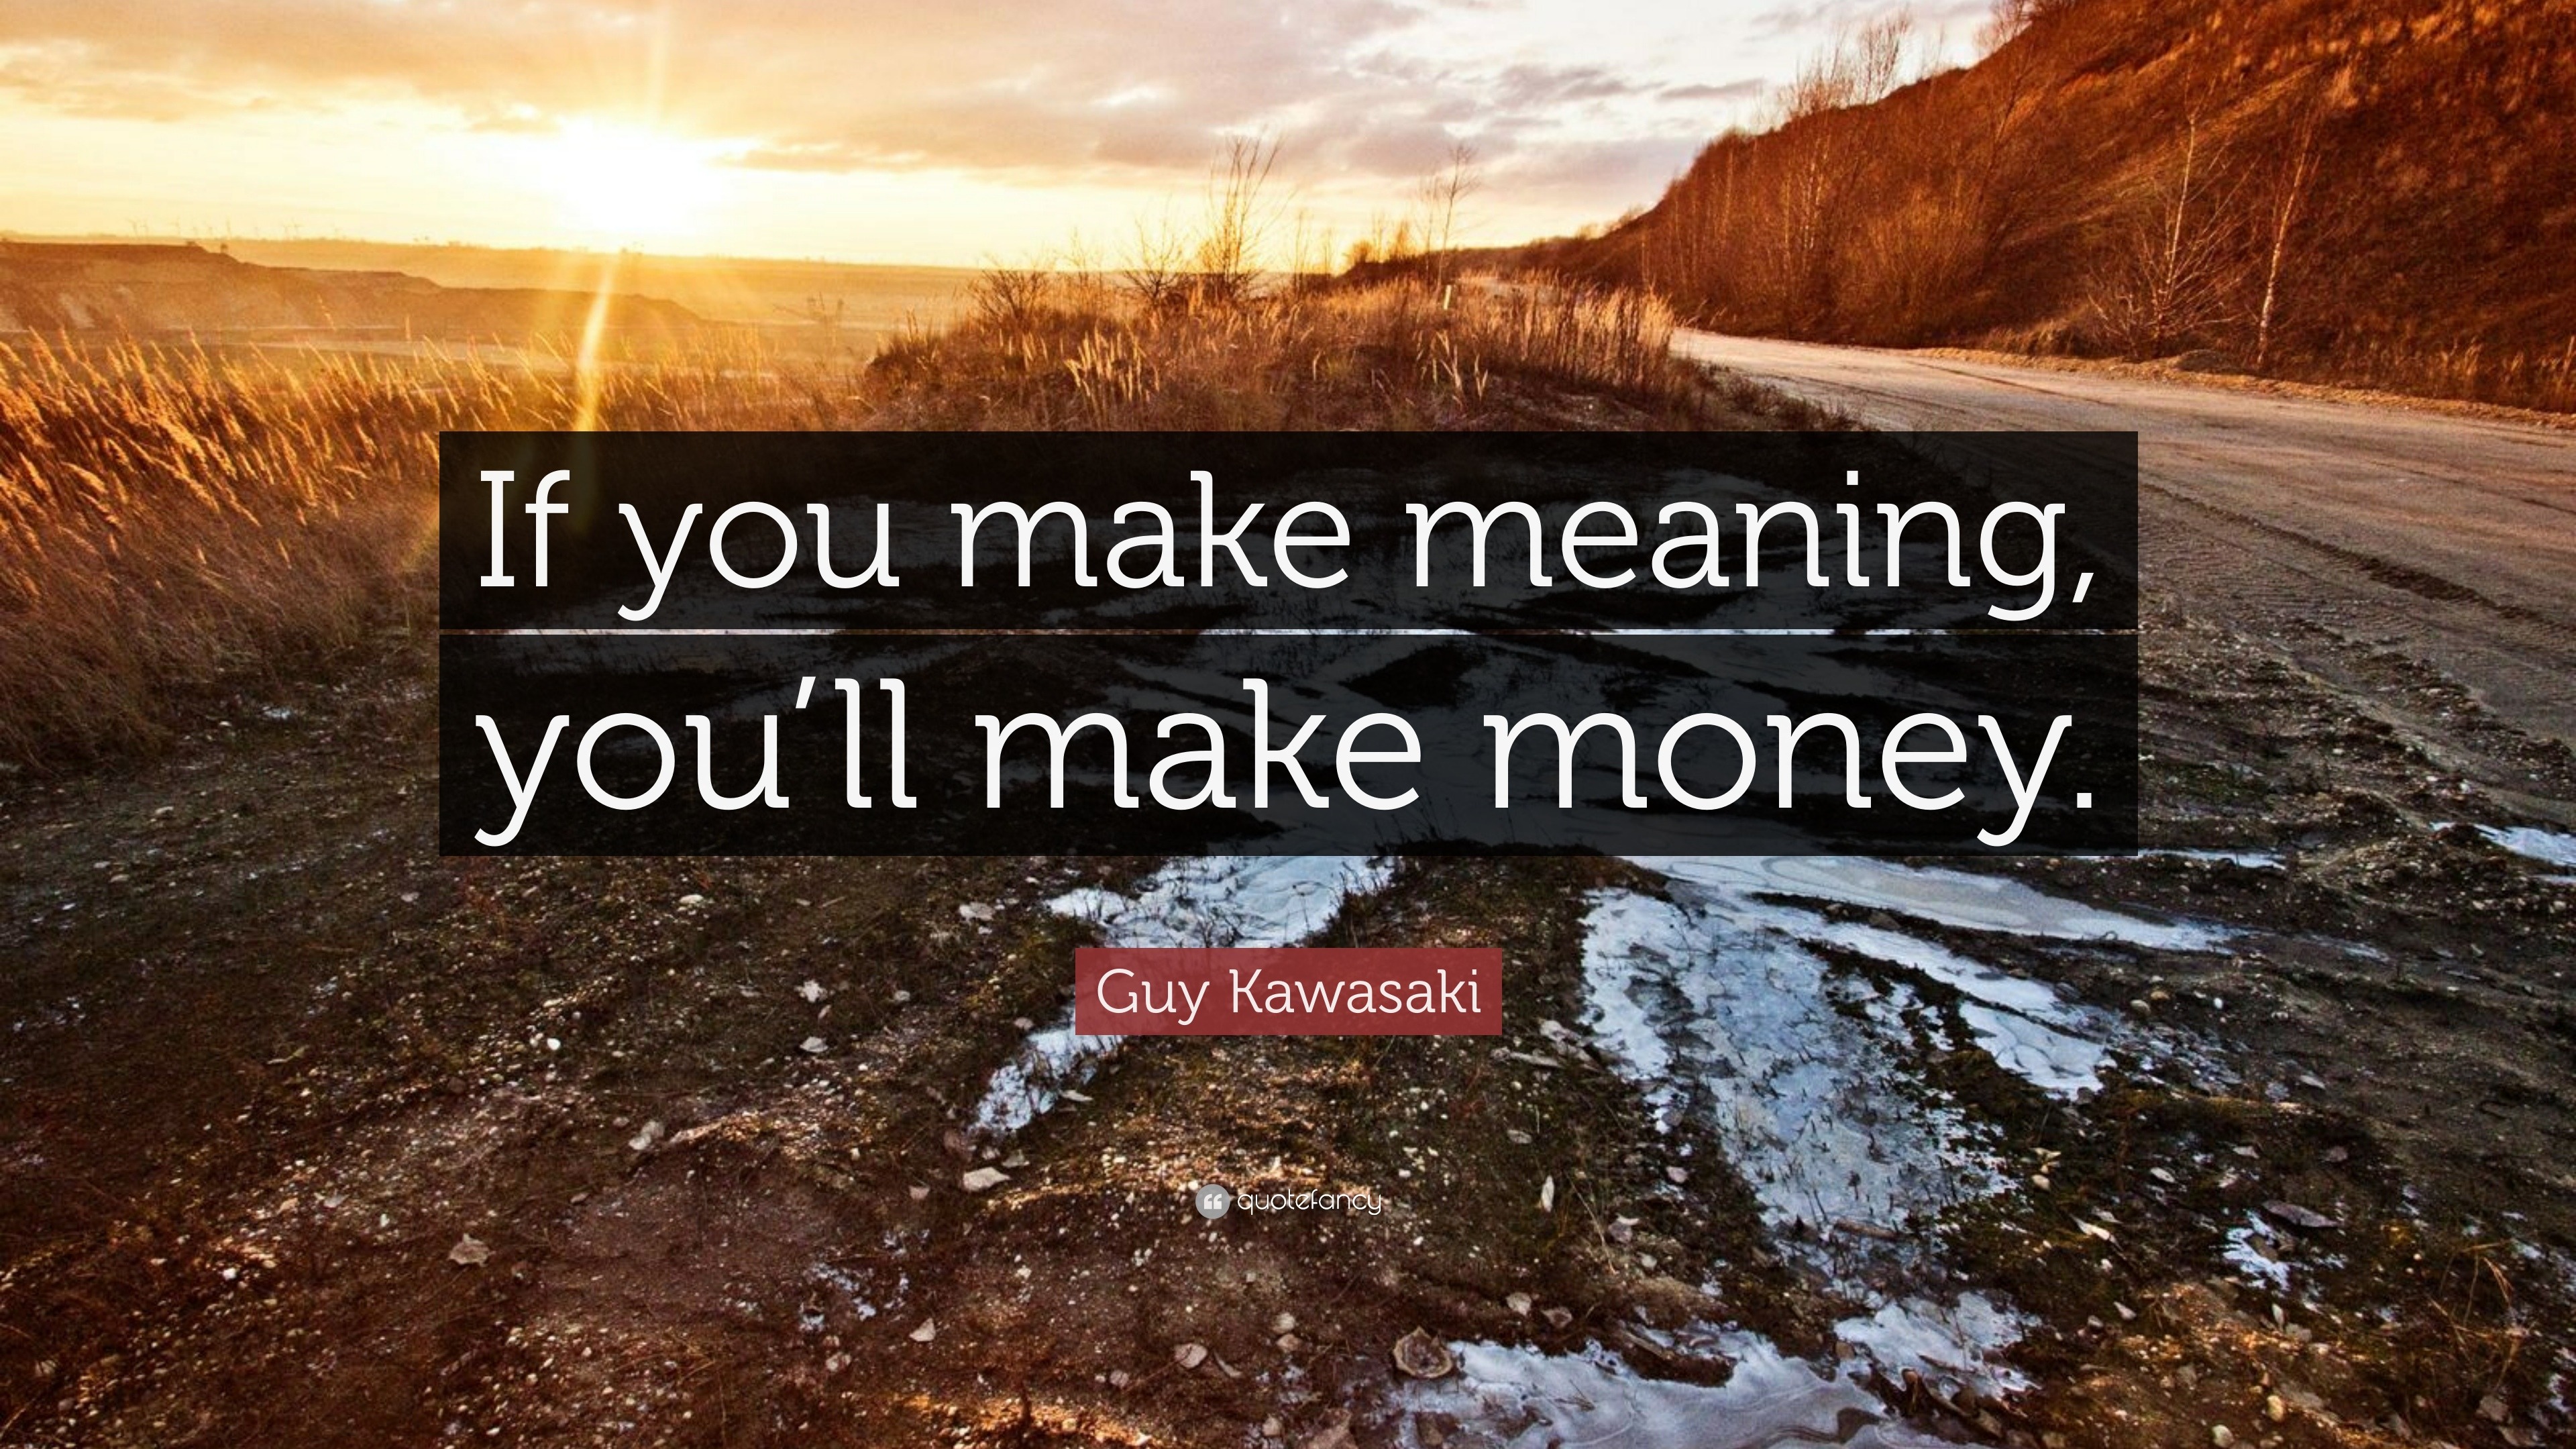 Making Money Quotes And Sayings